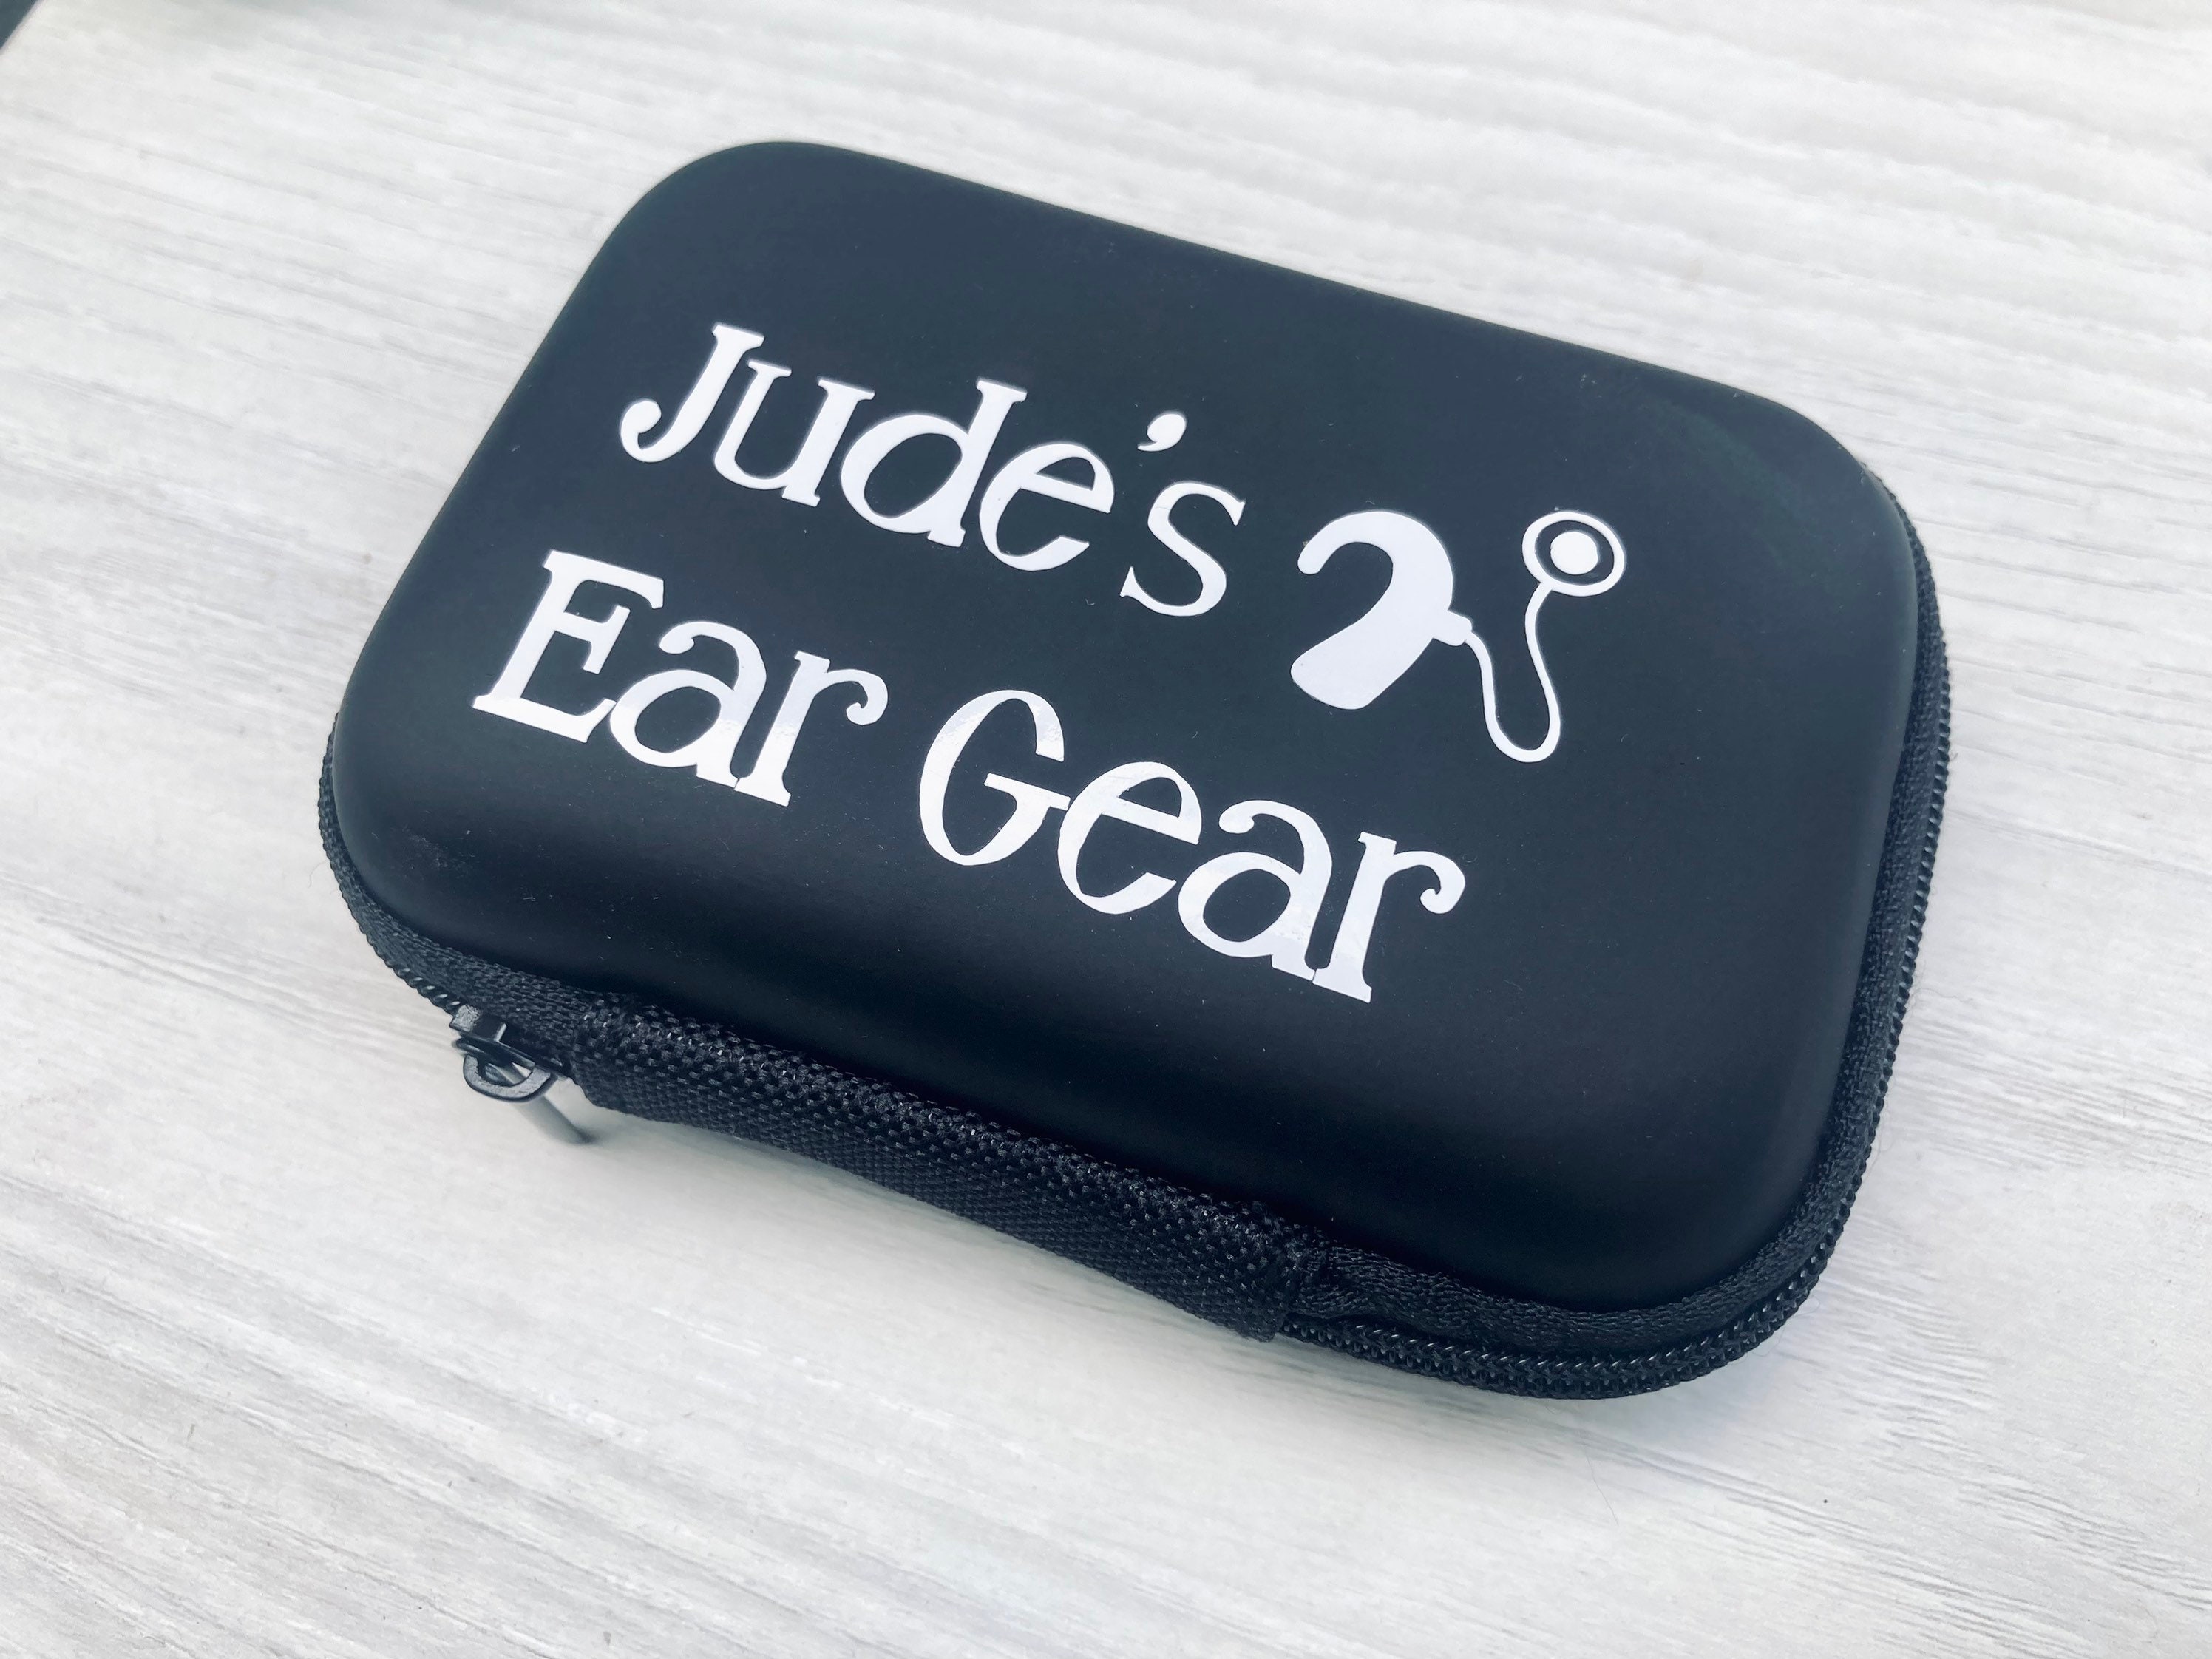 Hearing Aid ASL Sign Language Ear Gear Zip Case for Cochlear